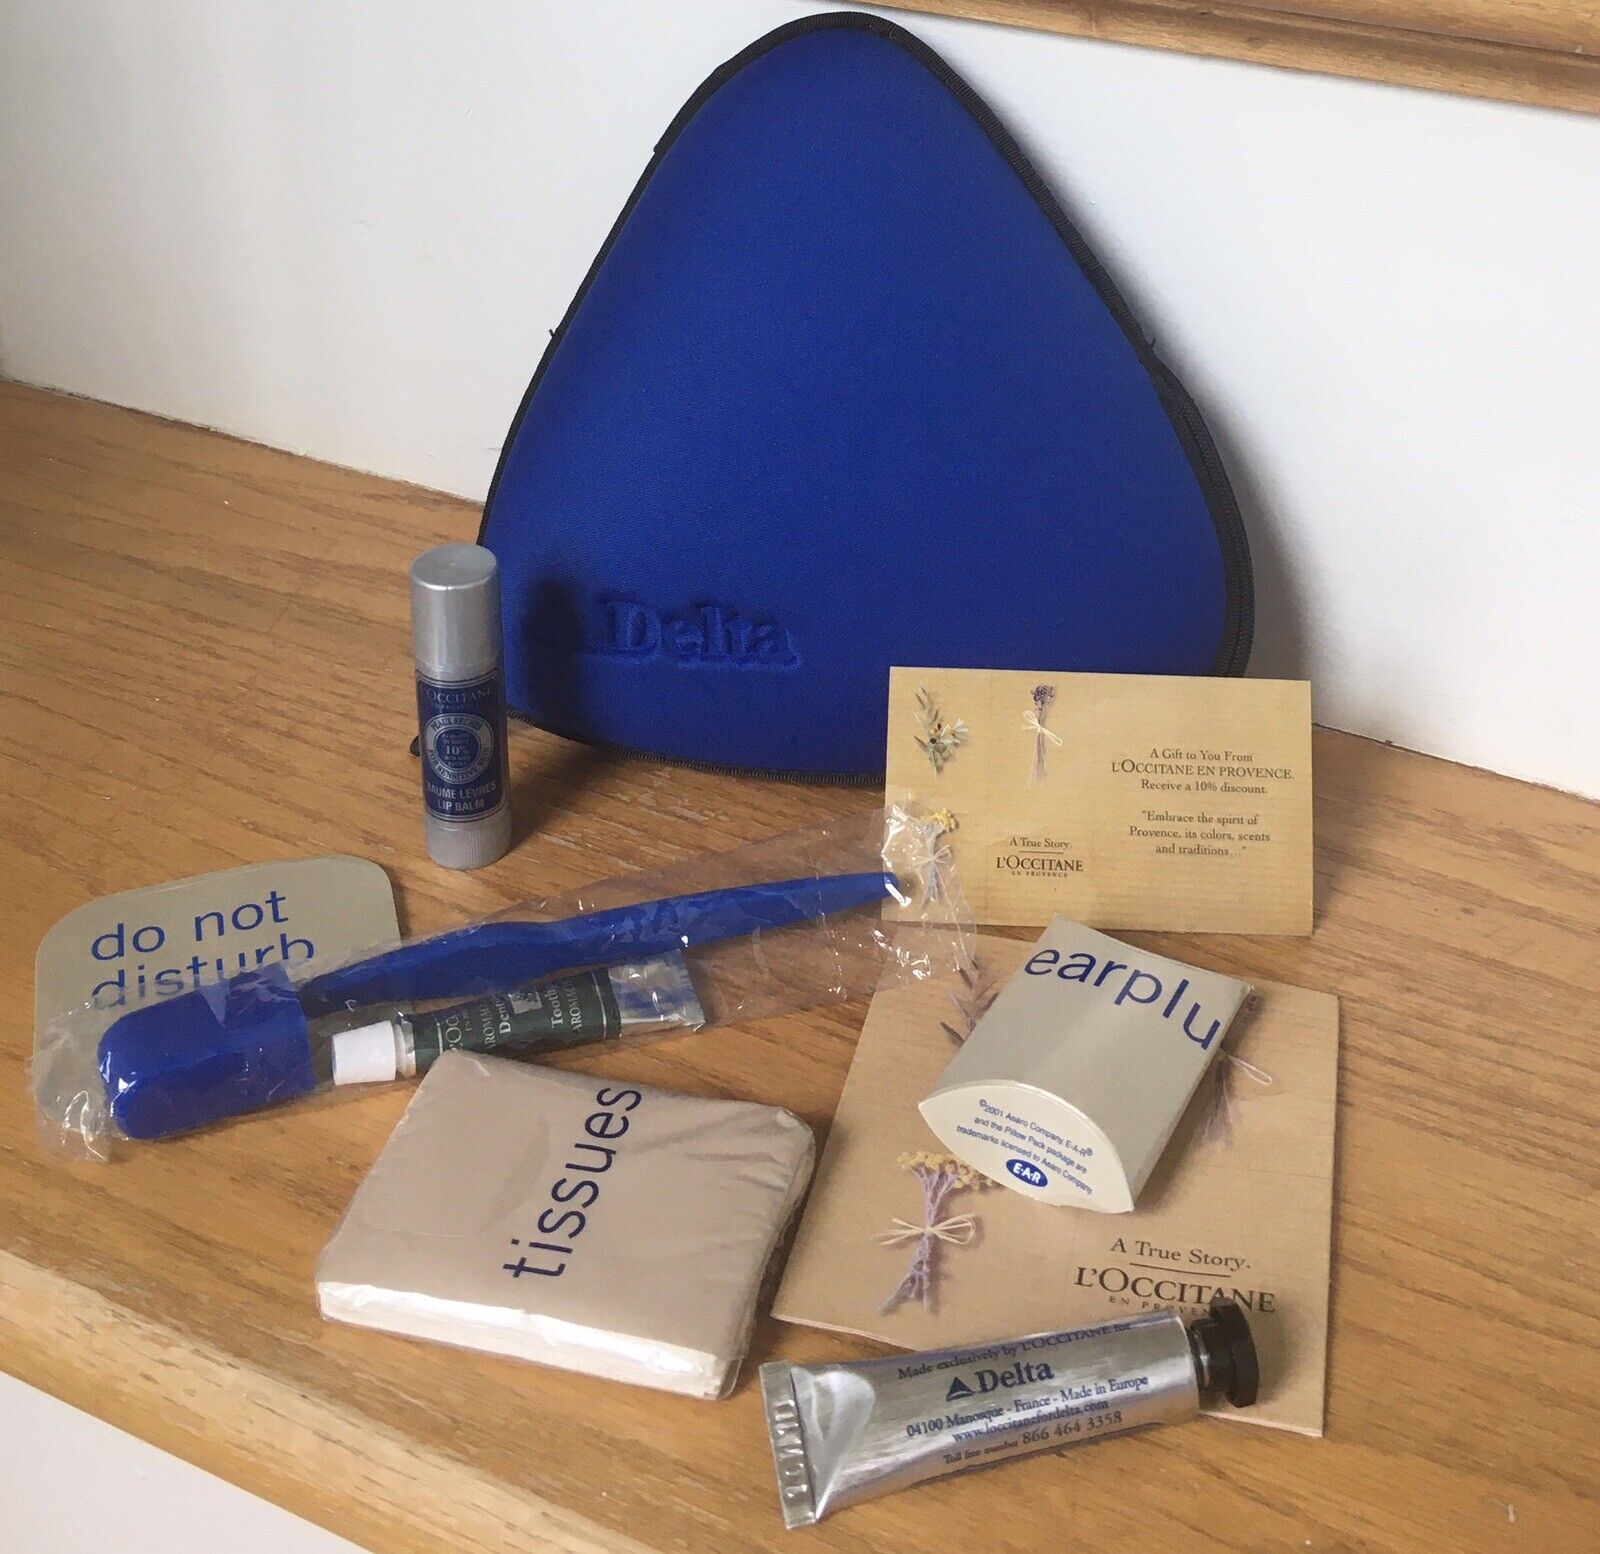 Vintage Delta Air Lines Blue Triangle Travel Amenities Kit With L'Occitane Items